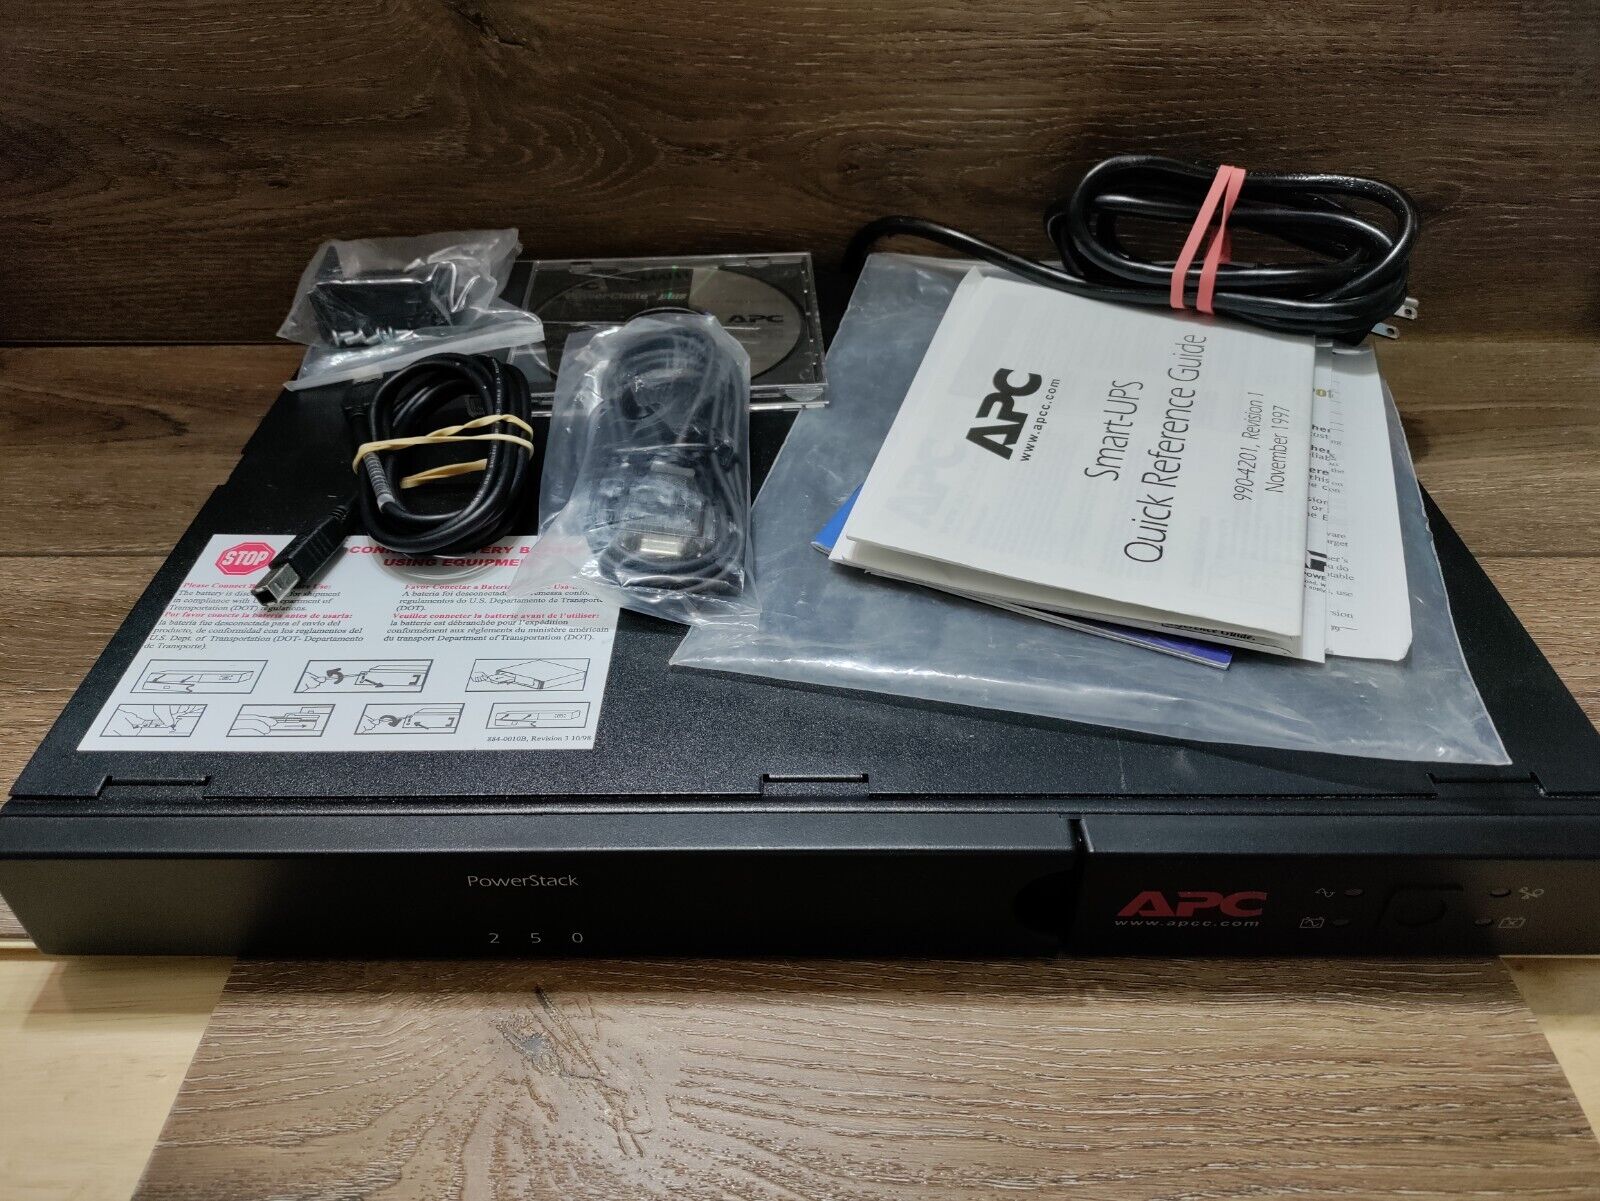 APC Power Stack 250 Complete With All Cables, Brackets, Instructions Etc.TESTED